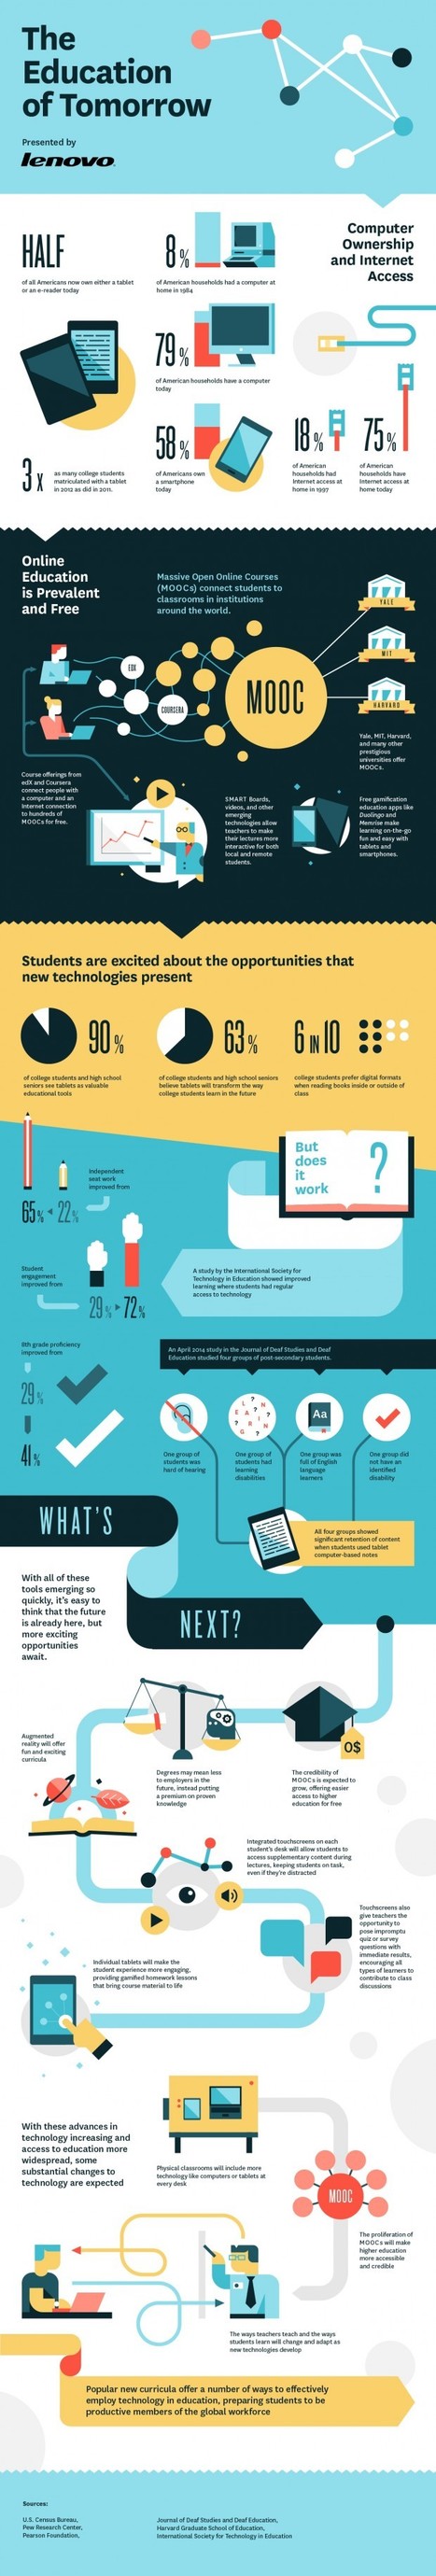 What Is The Future Of Education? Infographic - e-Learning Infographics | gpmt | Scoop.it